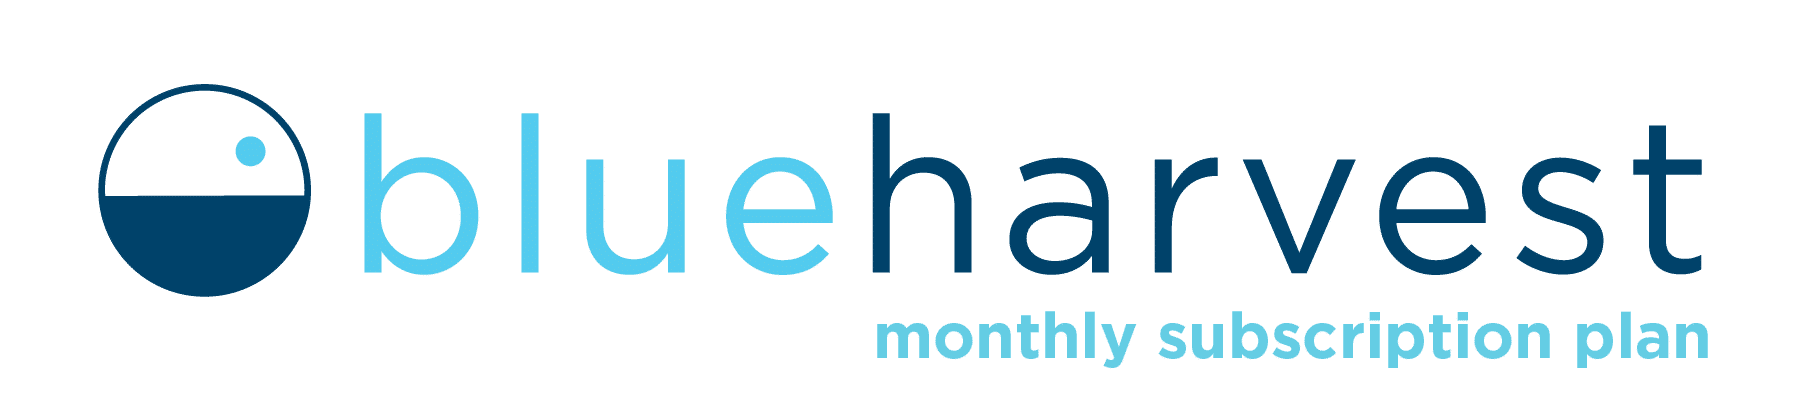 blue harvest monthly subscription plan